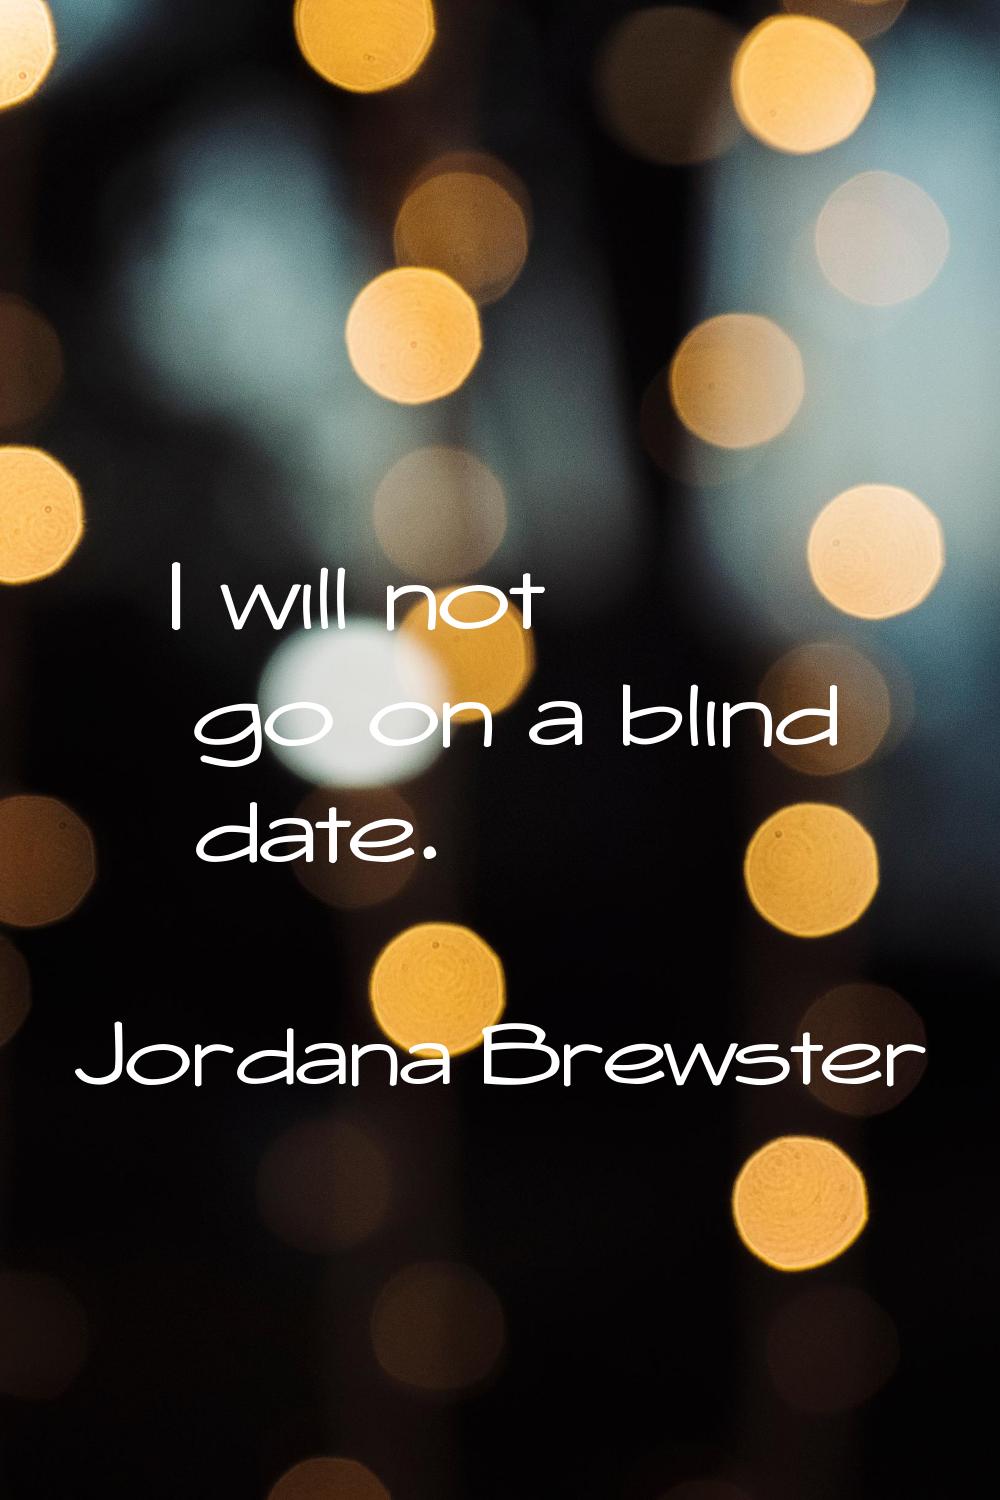 I will not go on a blind date.